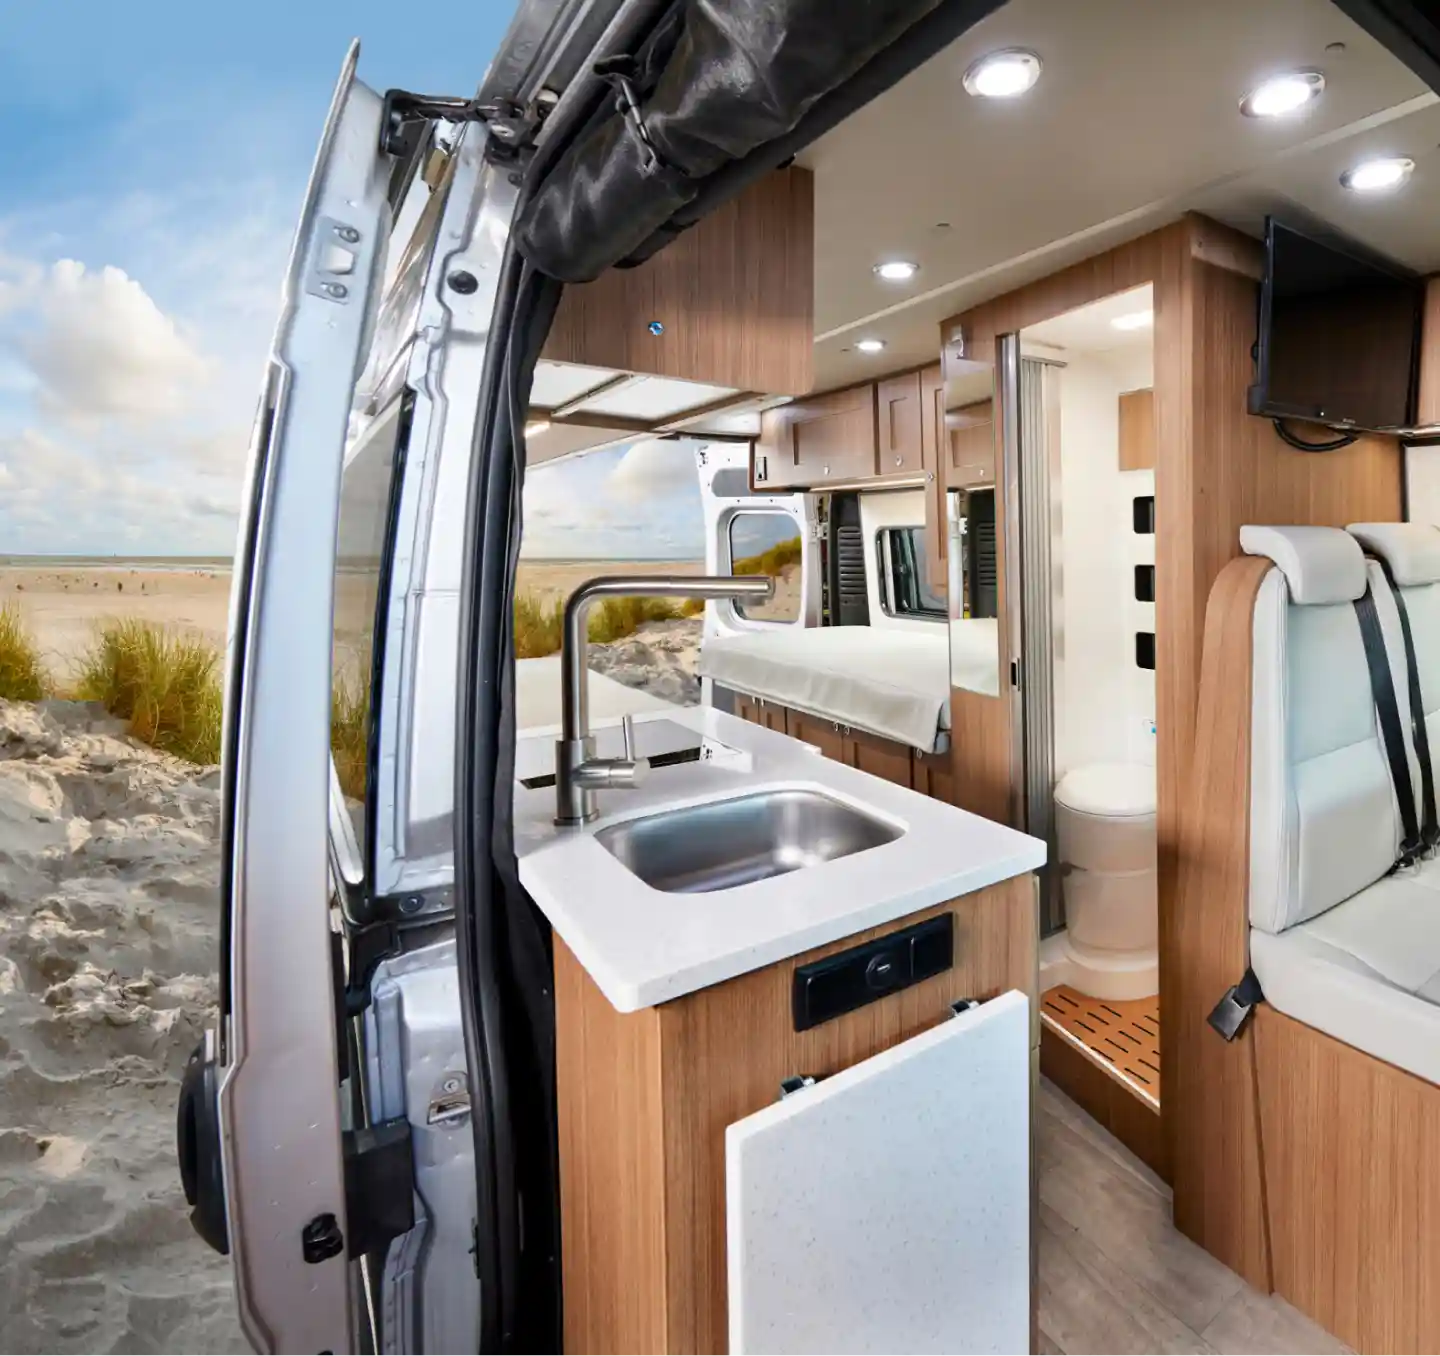 Interior of a motorhome showcasing cozy living quarters, compact kitchenette, and clever storage solutions, providing comfort and convenience for travelers exploring the open road.